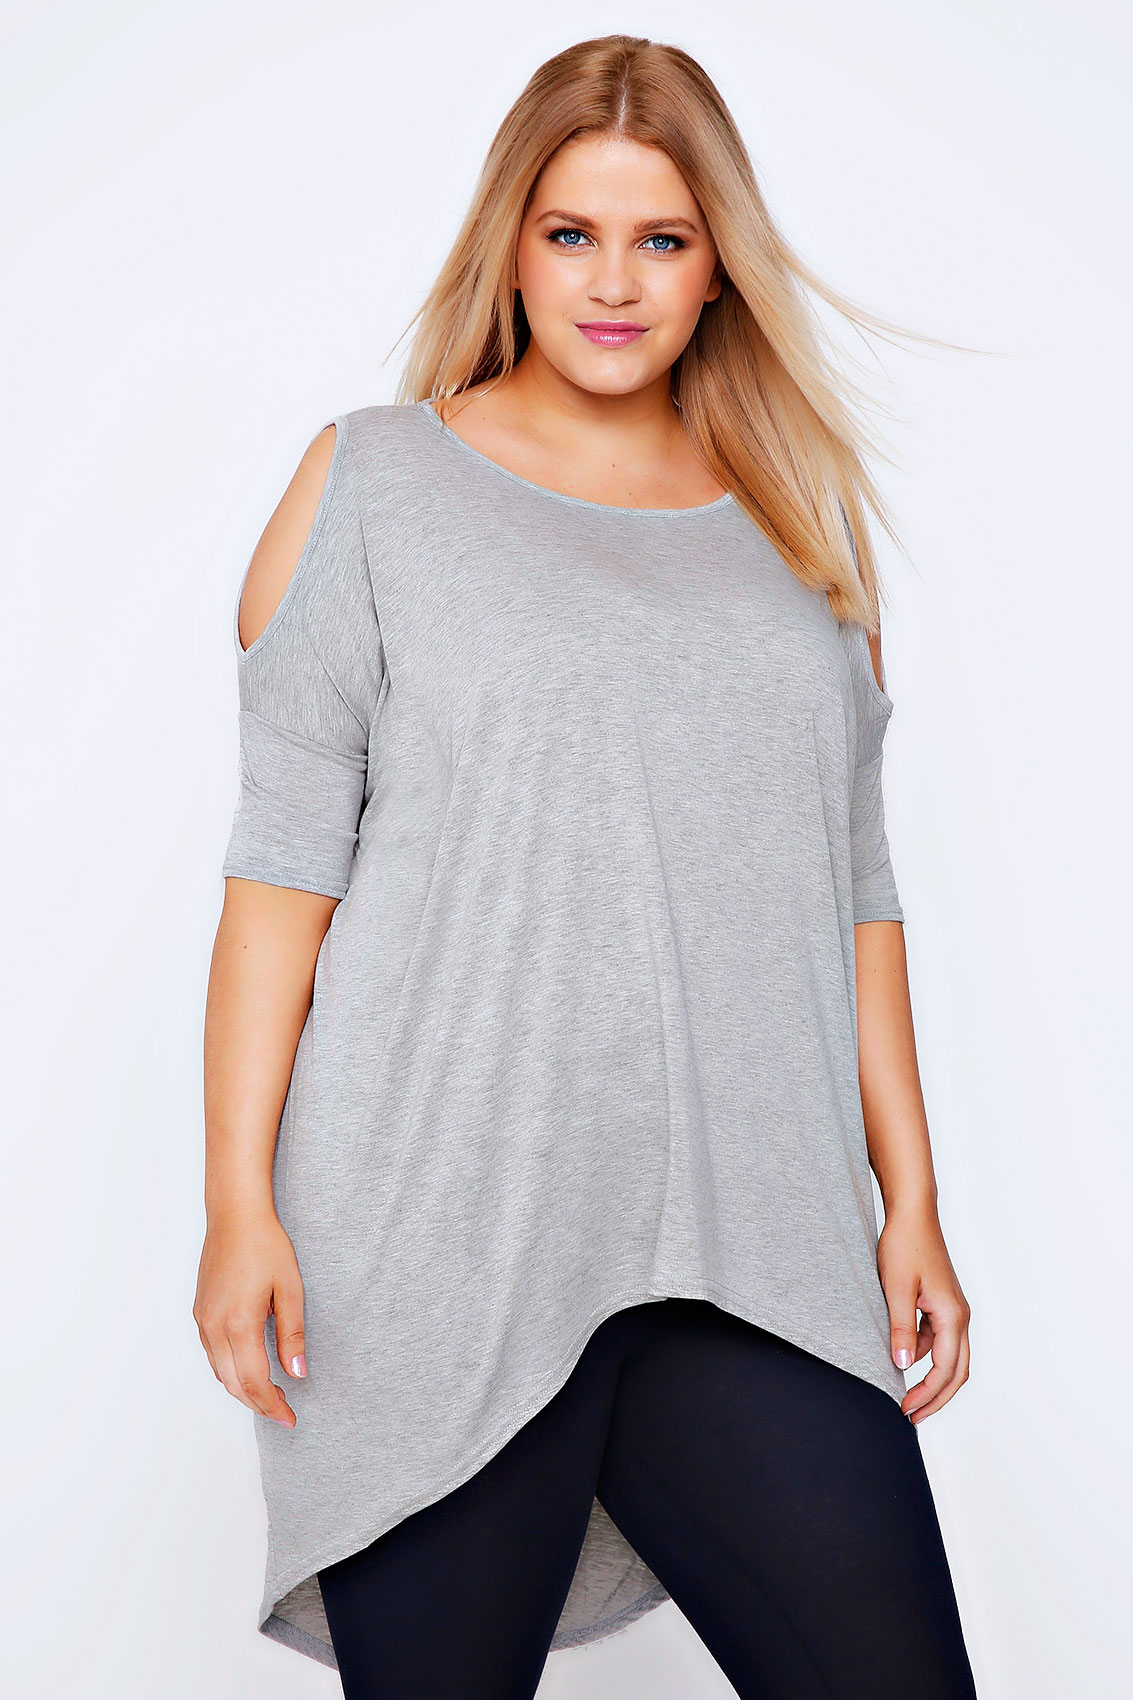 Grey Marl Oversized Top With Cold Shoulder Cut Out & Extreme Dipped Hem ...